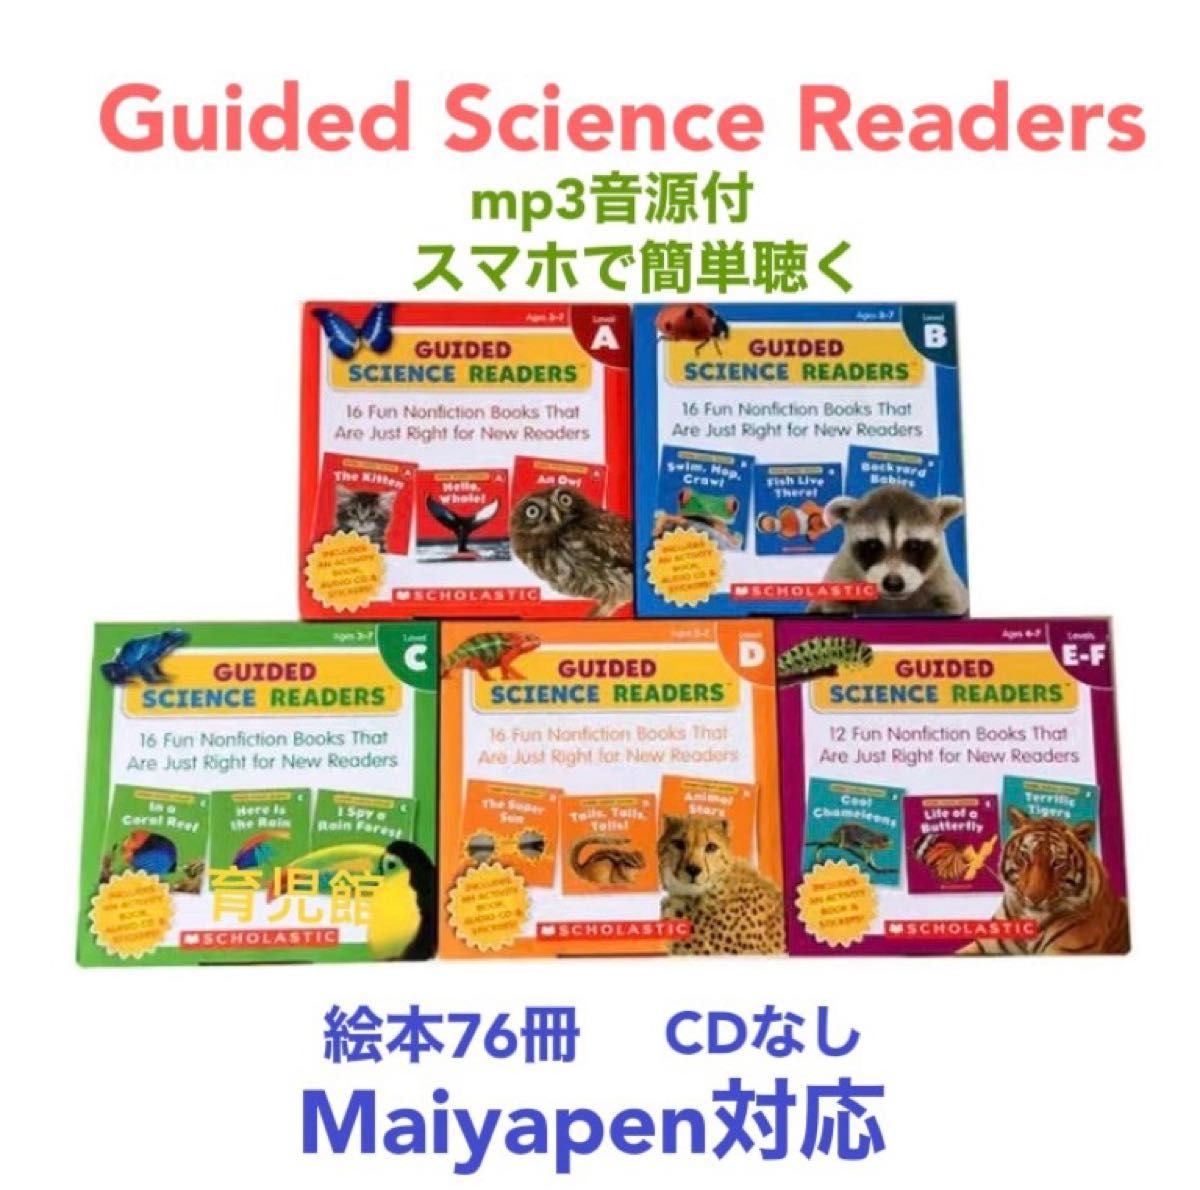 Guided Science Readers 全冊音源付CDなしマイヤペン 対応